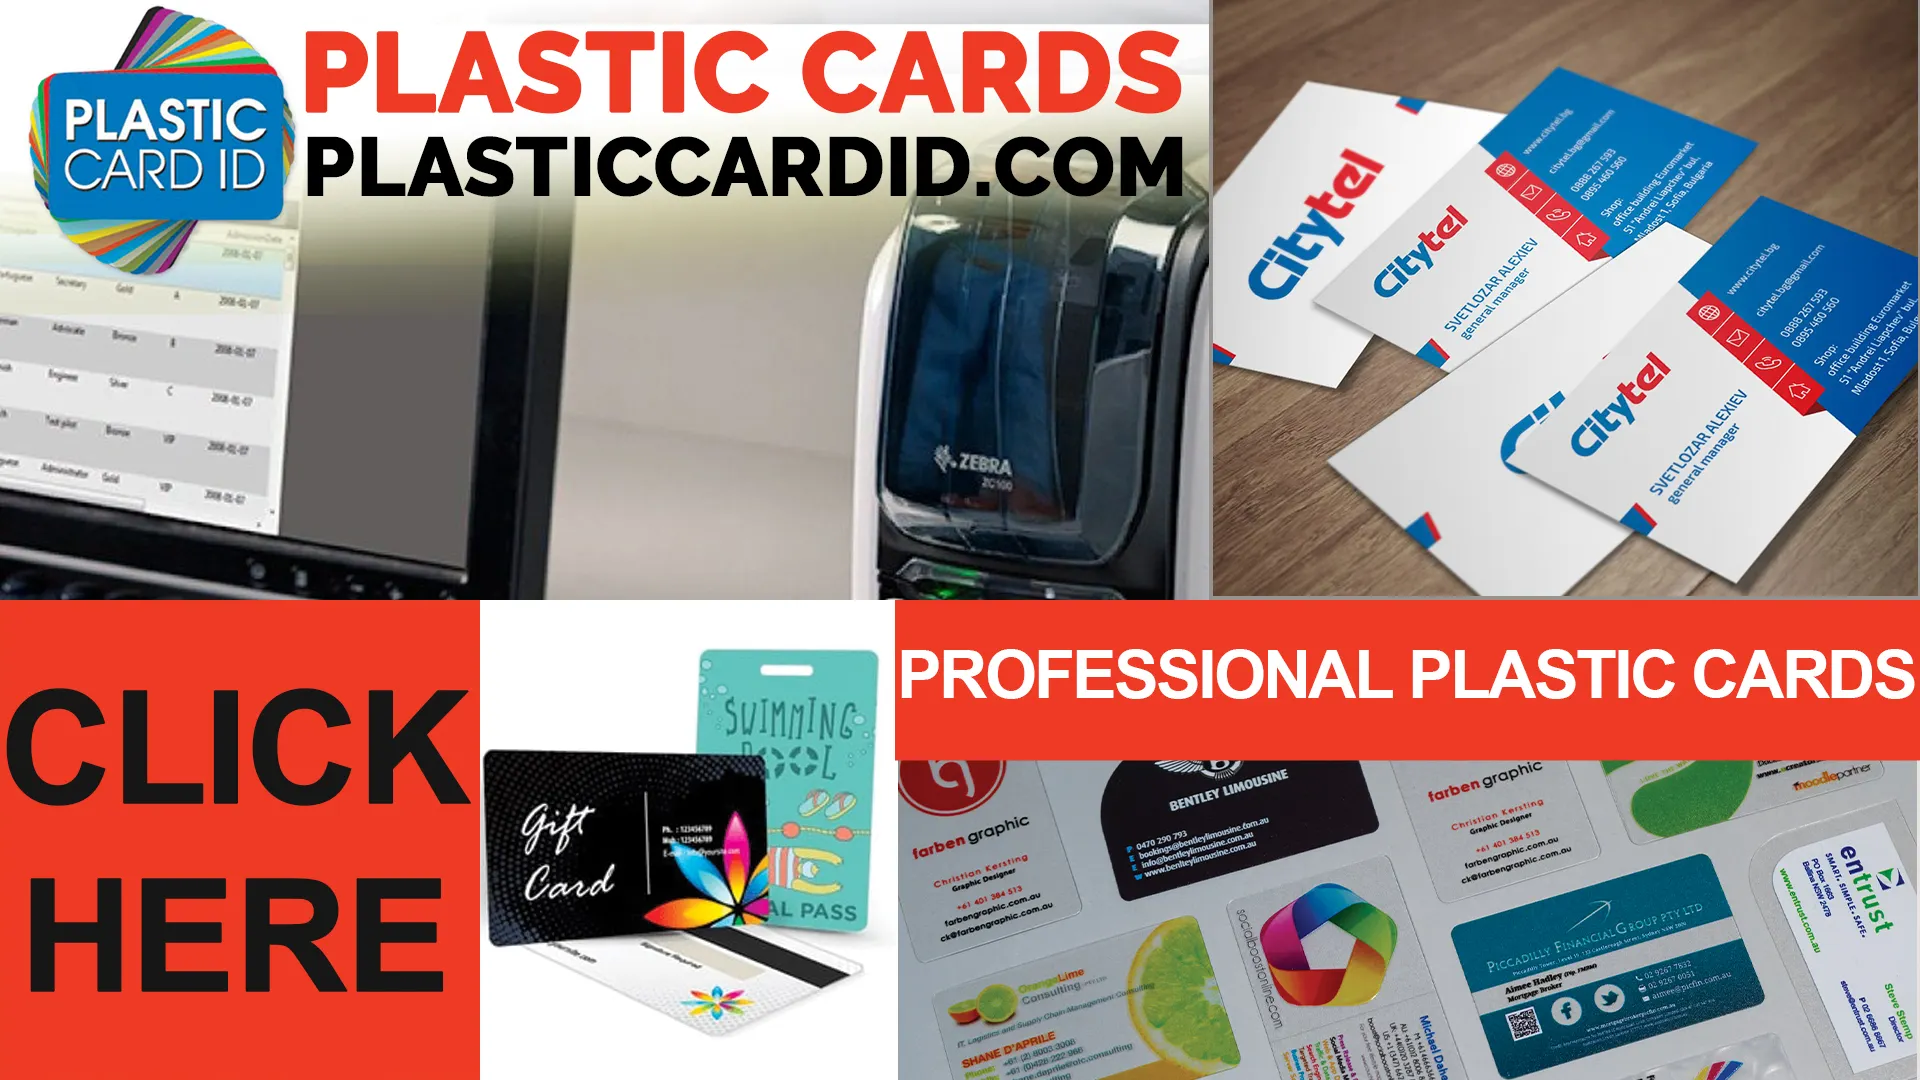 Why Choose Biodegradable Plastic Cards?